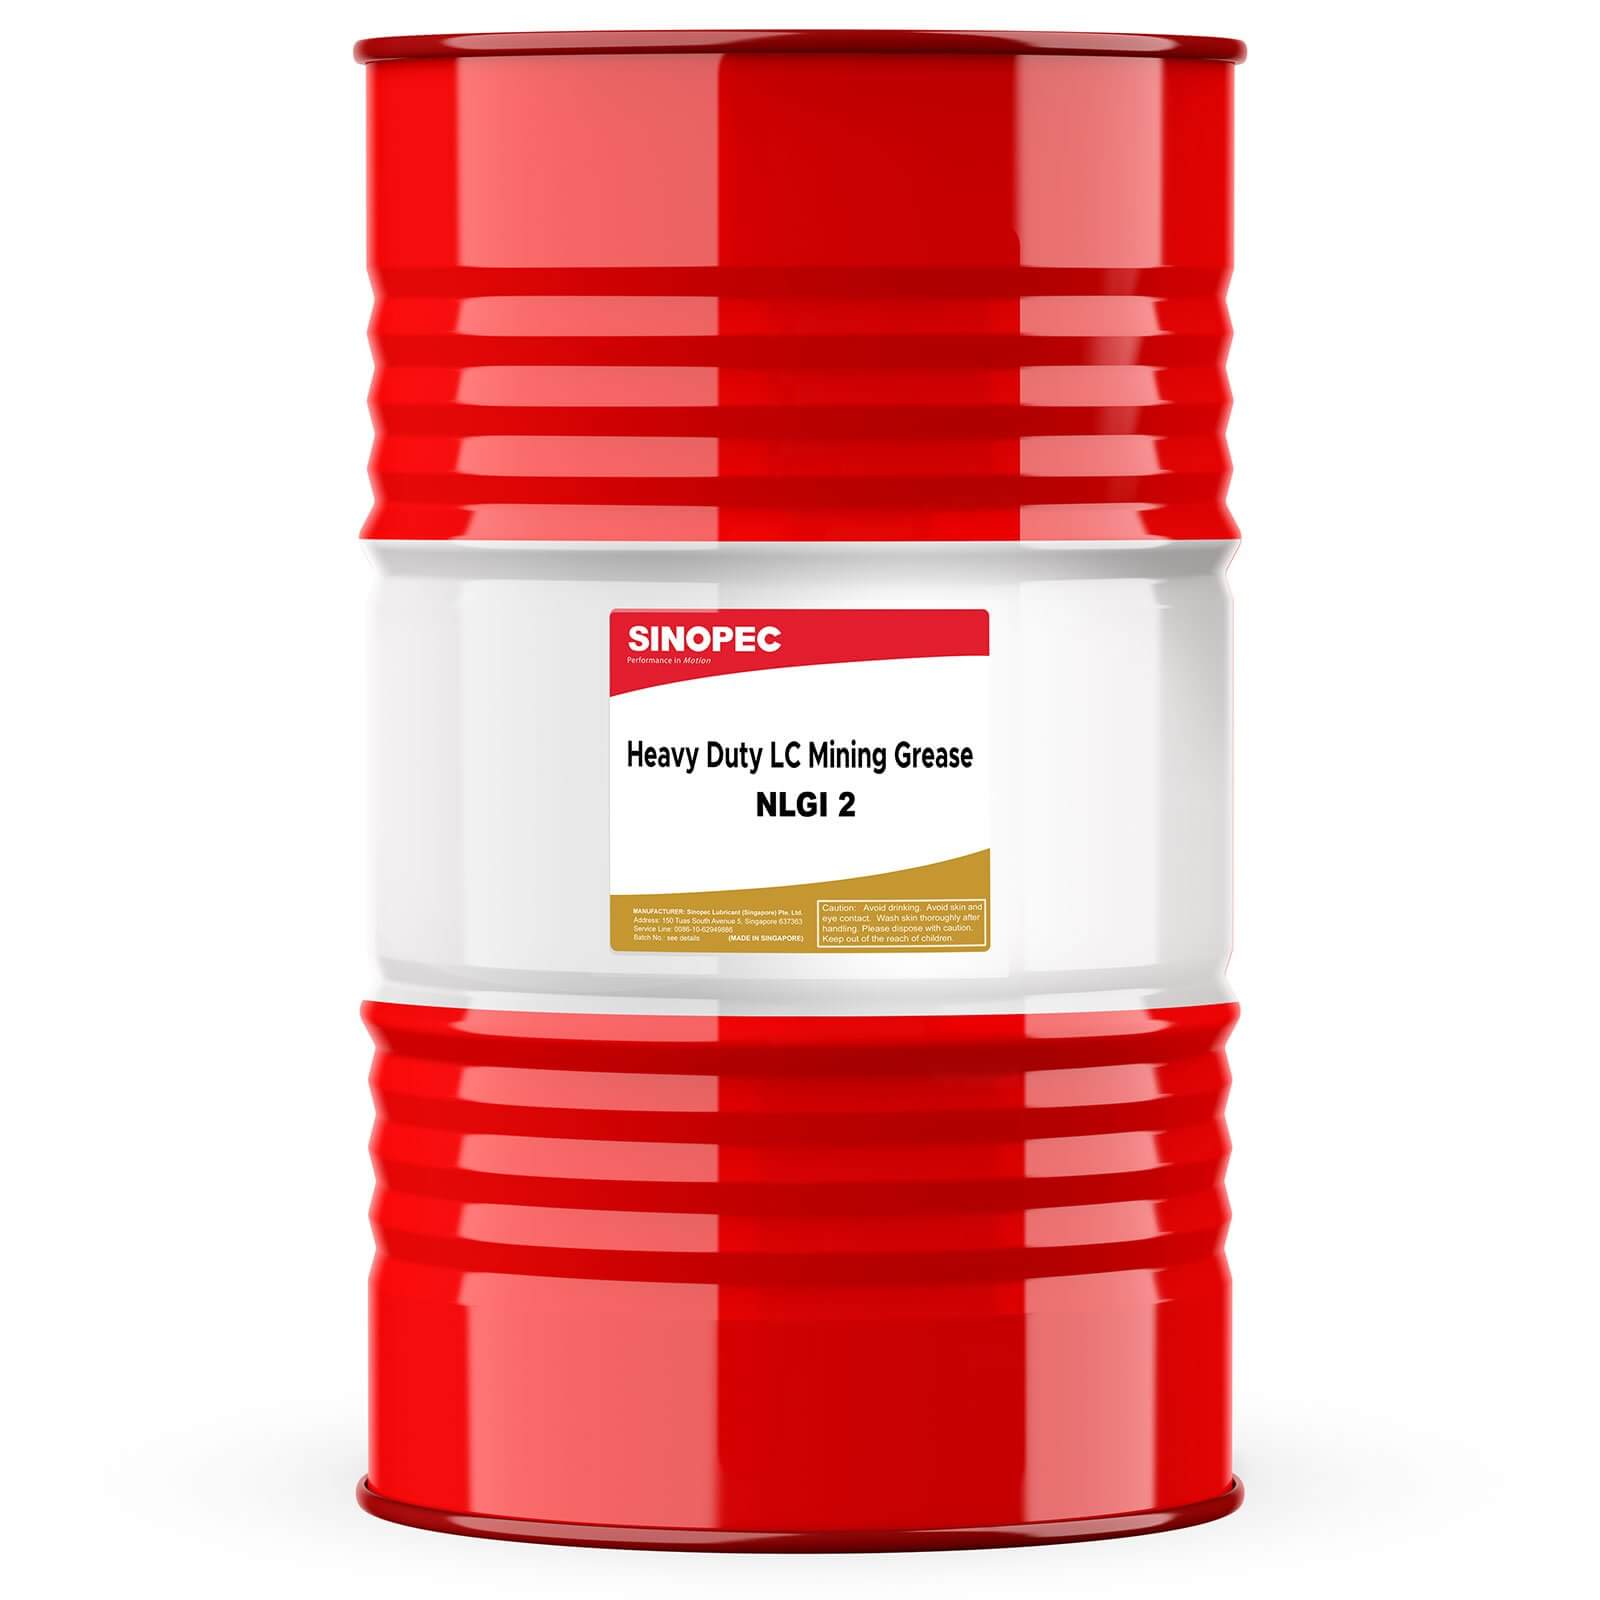 Moly 5% Lithium Complex High Temp EP2 Grease-SINOPEC-Brand_Sinopec,Category_Grease,Grade_NLGI 2,sinopec,Size_400 LB Drum,Type_Moly 5%